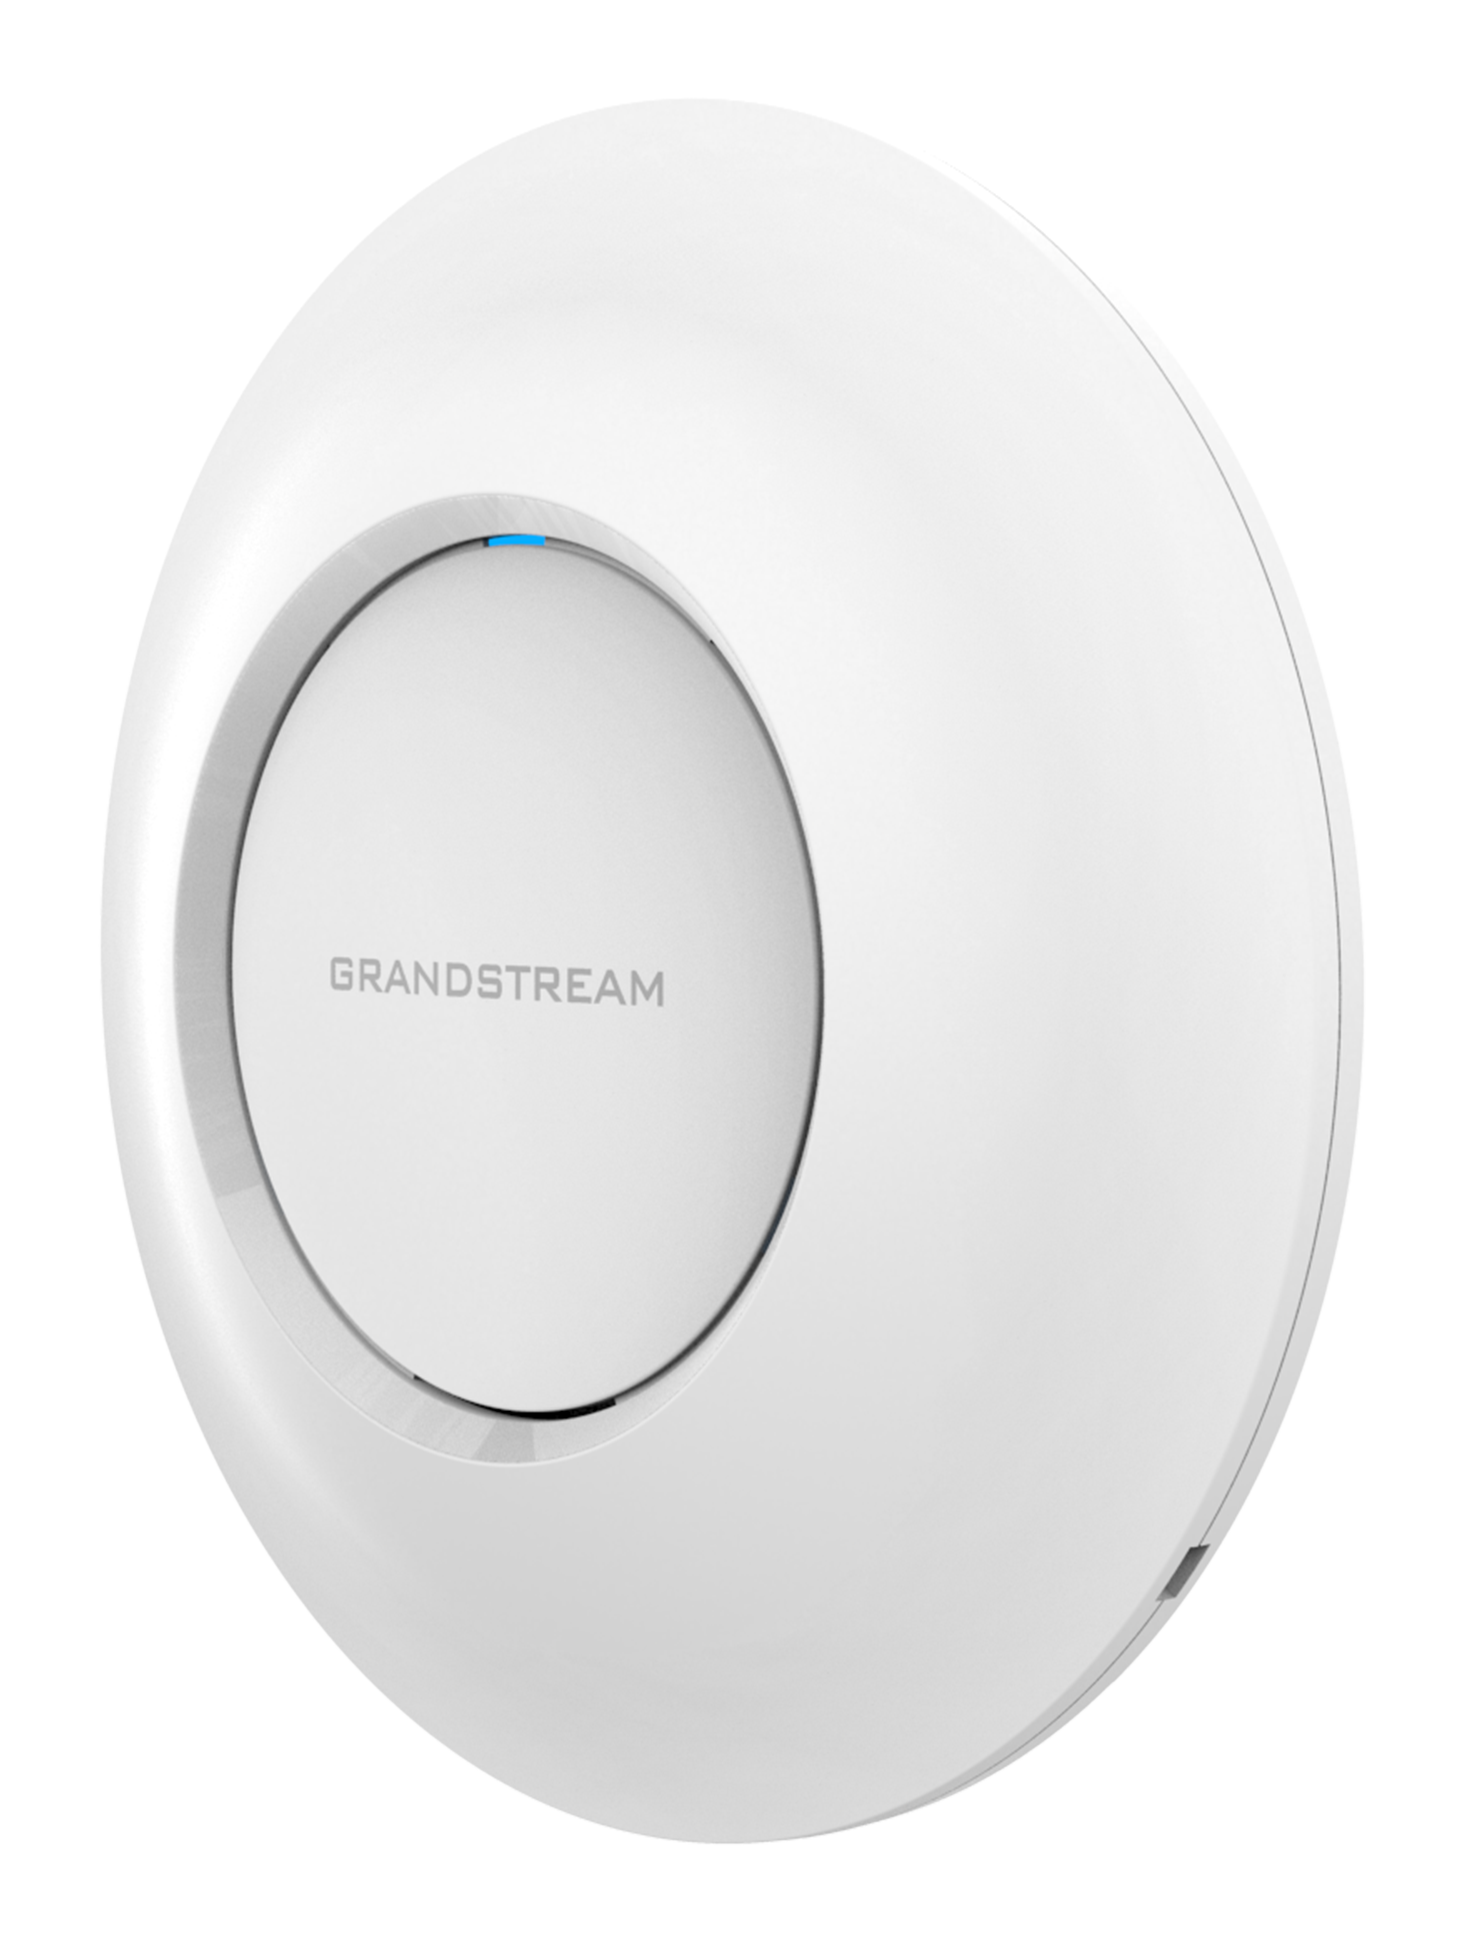 GRANDSTREAM 802.11AC 2X2 MIMO WAVE 2 ACCESS POINT